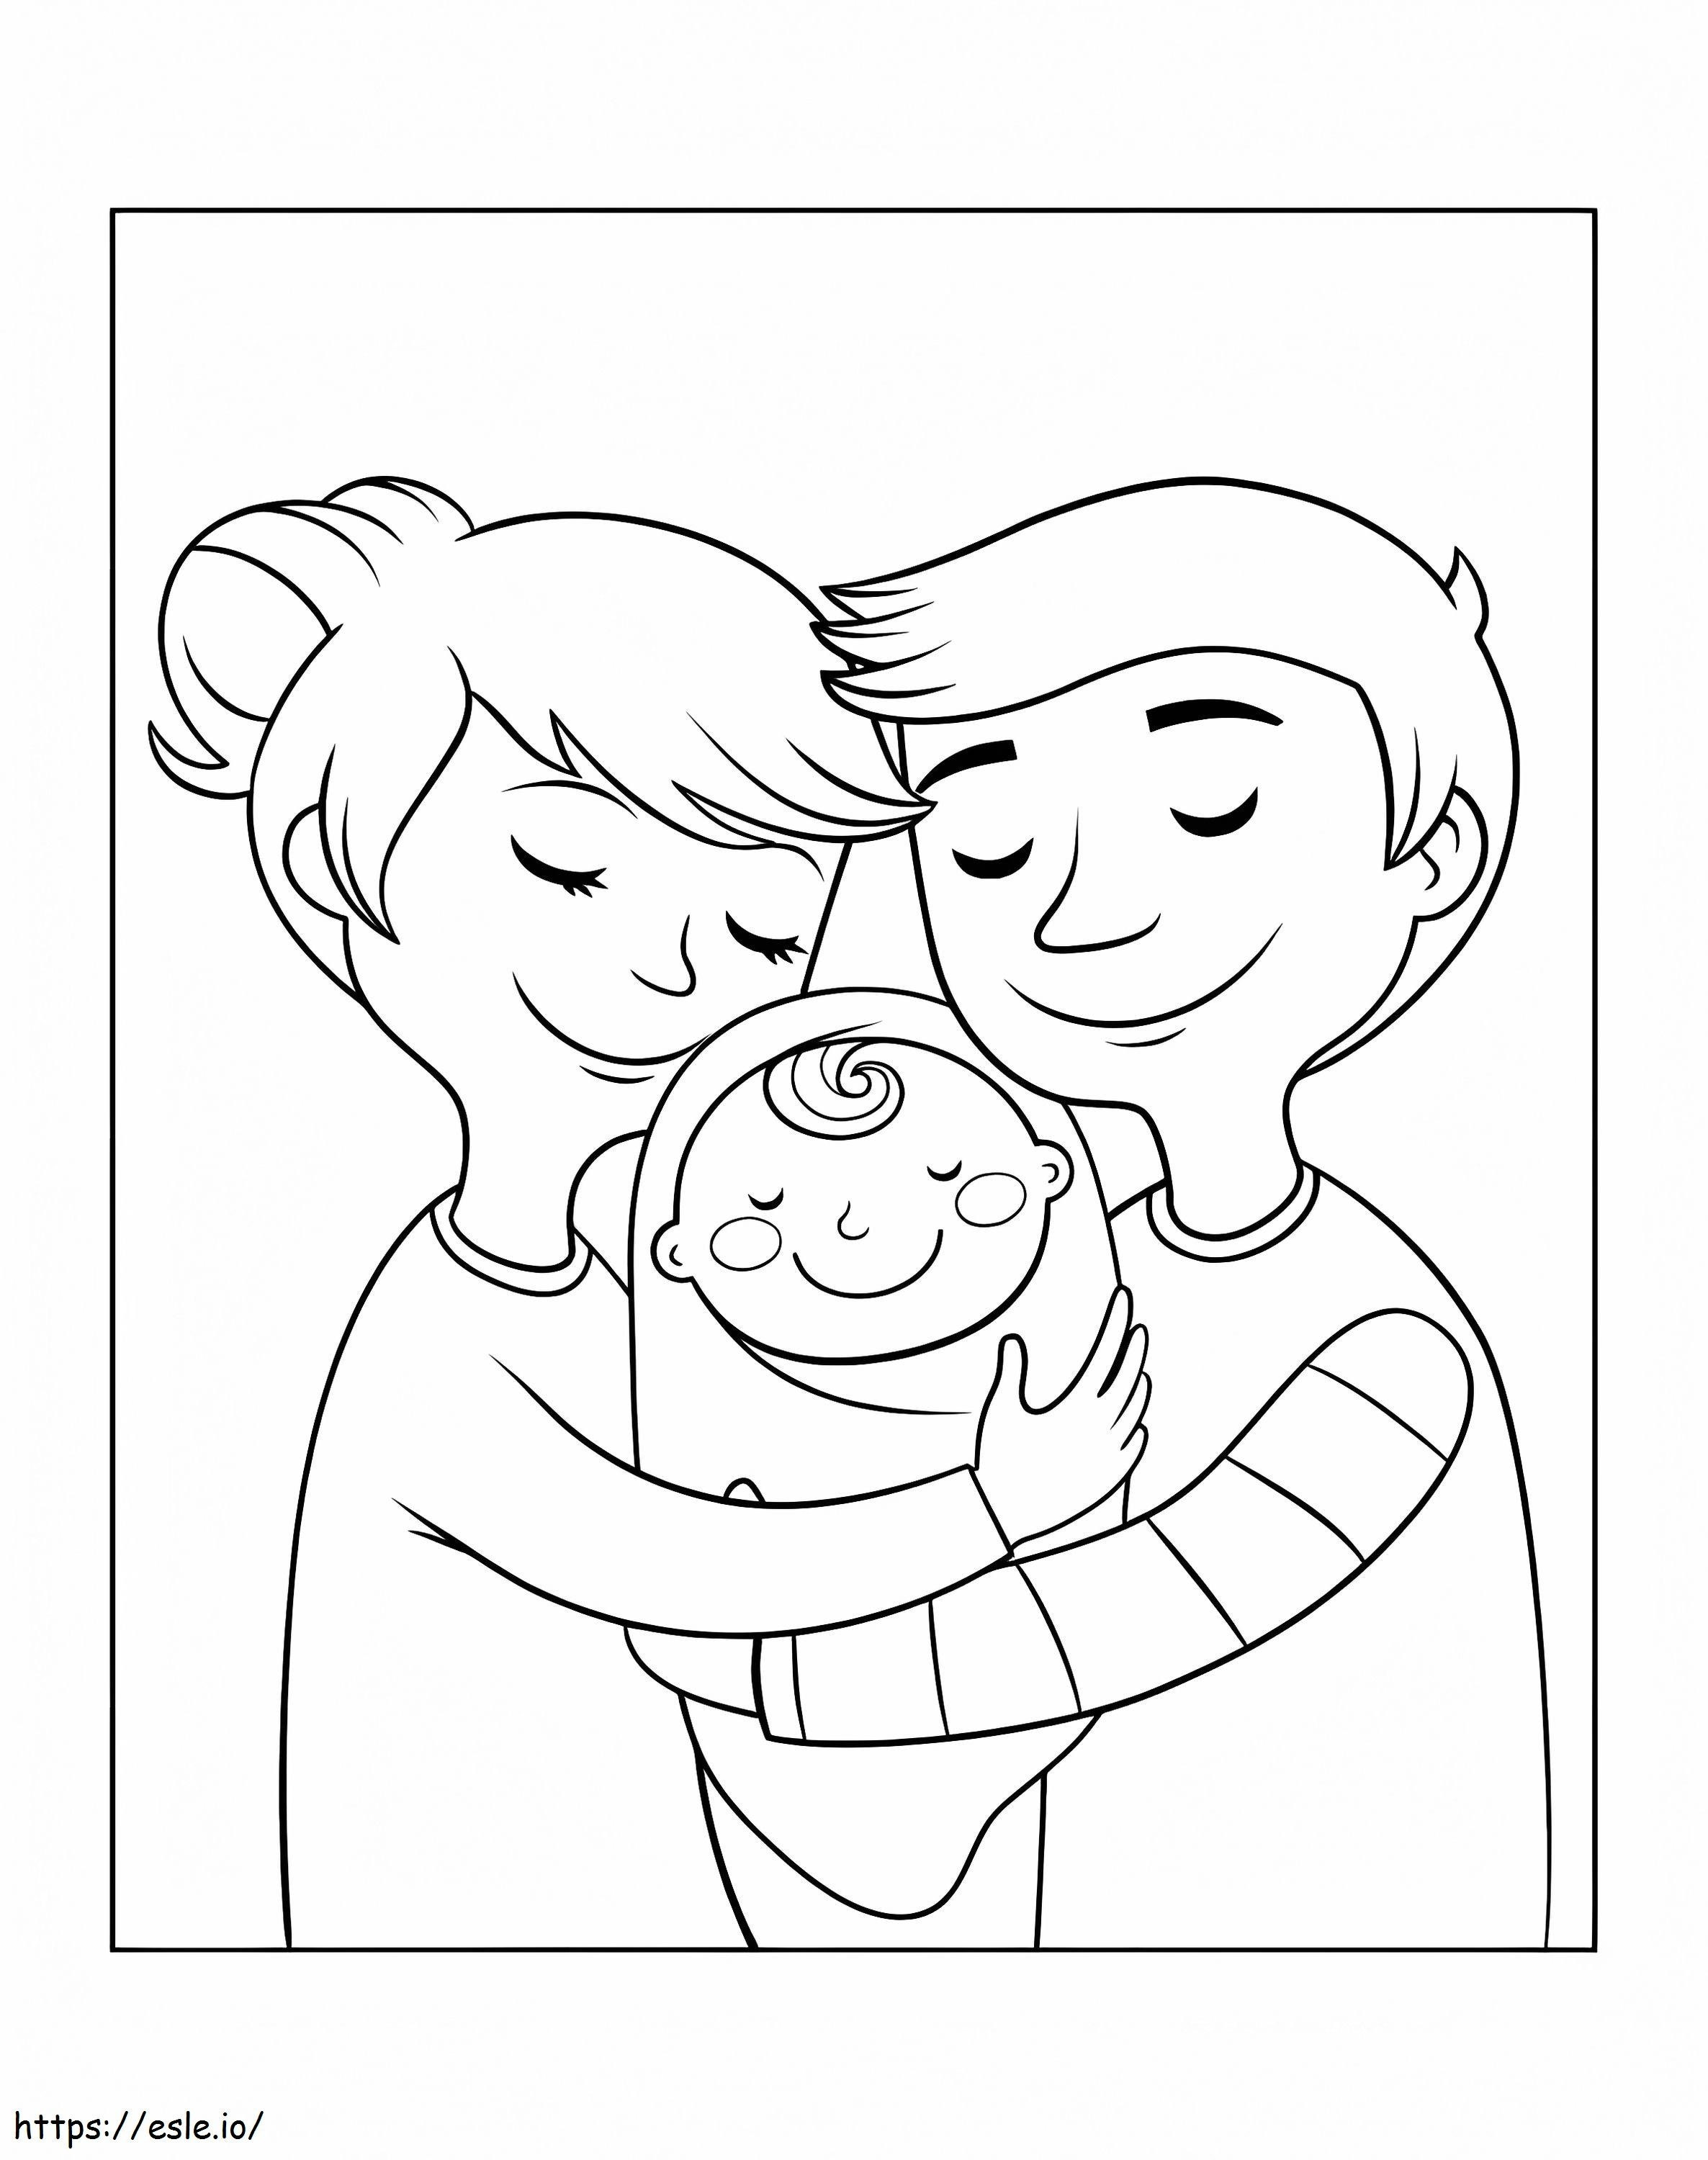 Happy Family coloring page